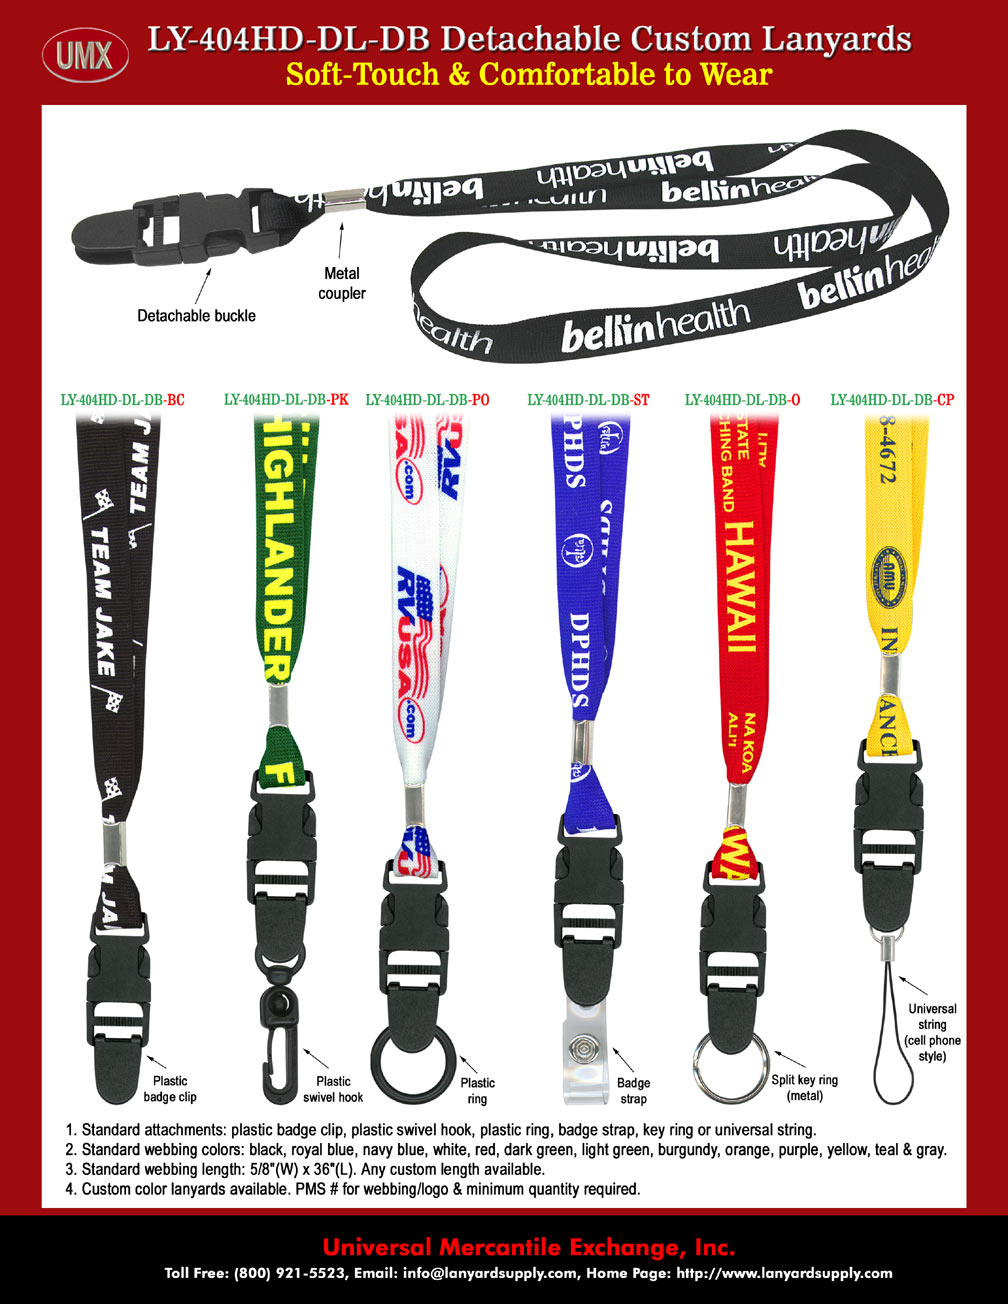 Soft Touch Detachable Lanyards With Custom Prints.